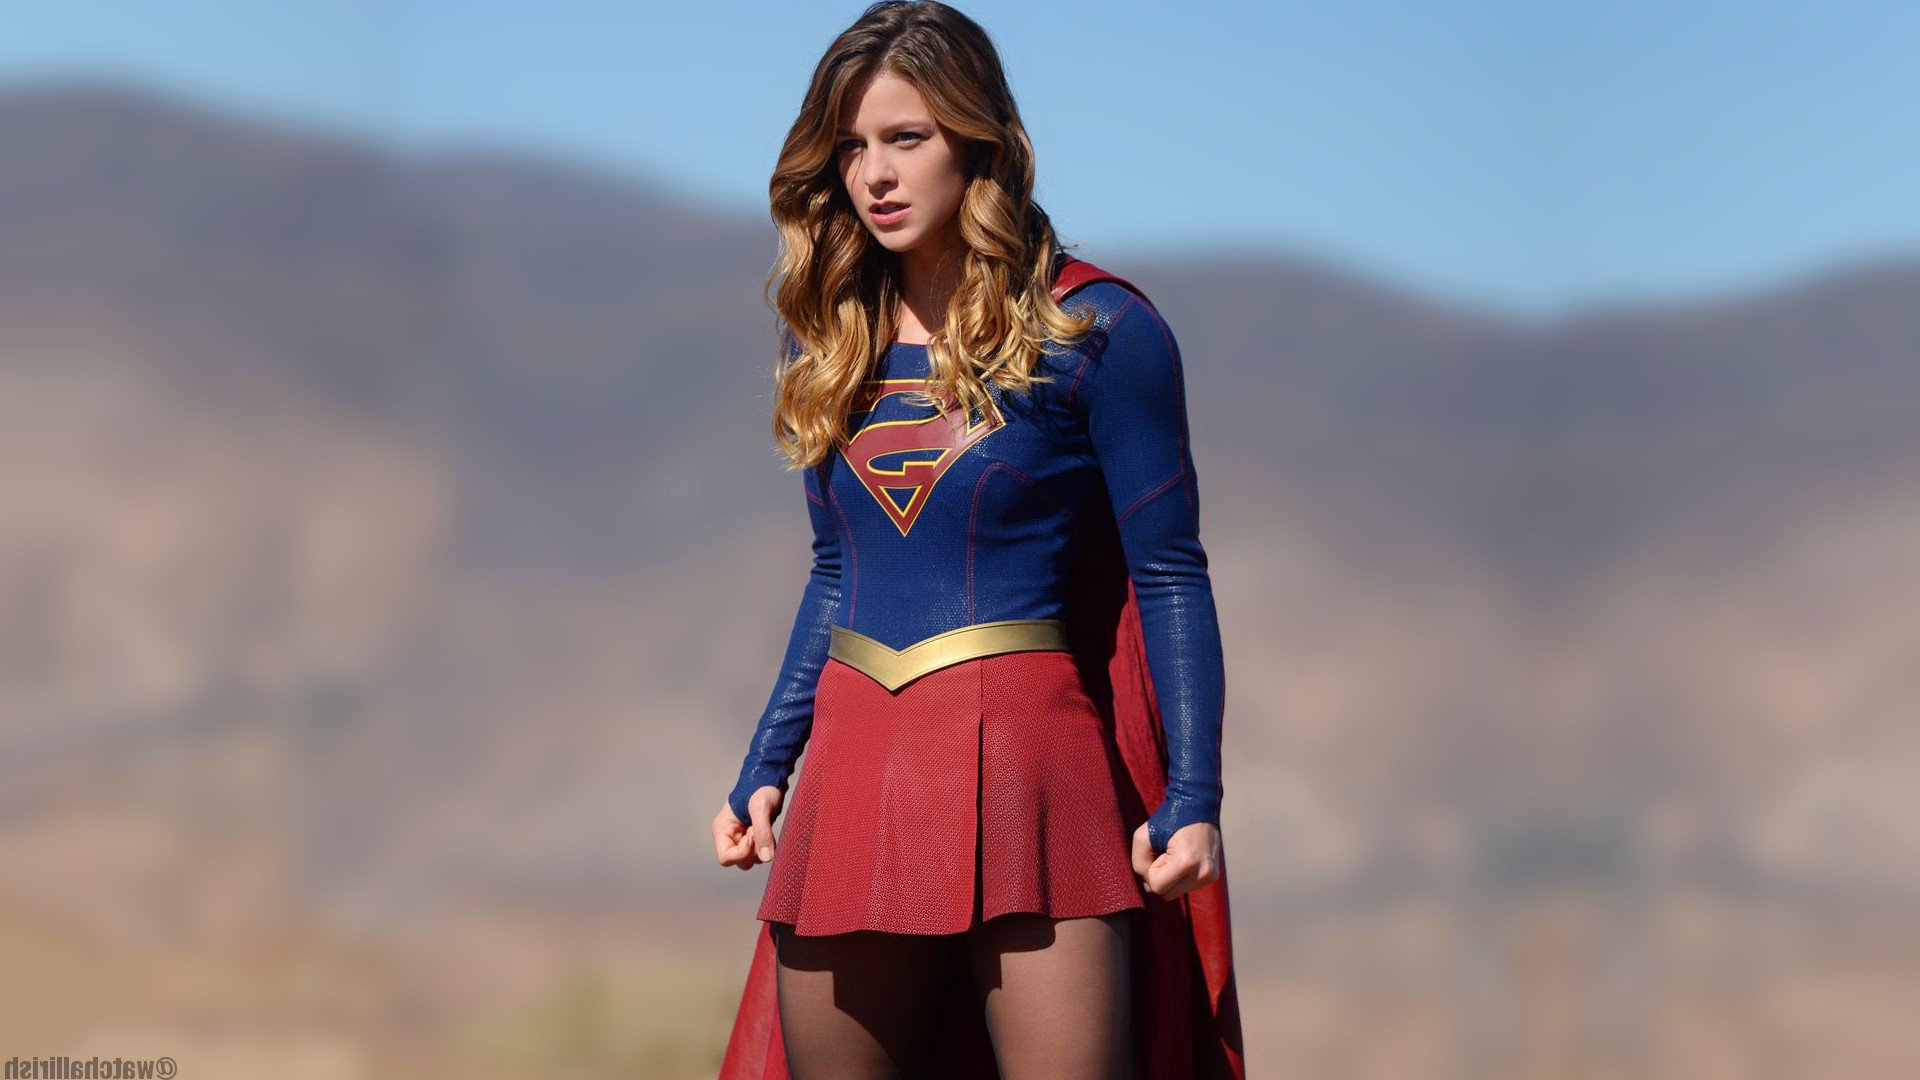 12 Supergirl HD Wallpapers